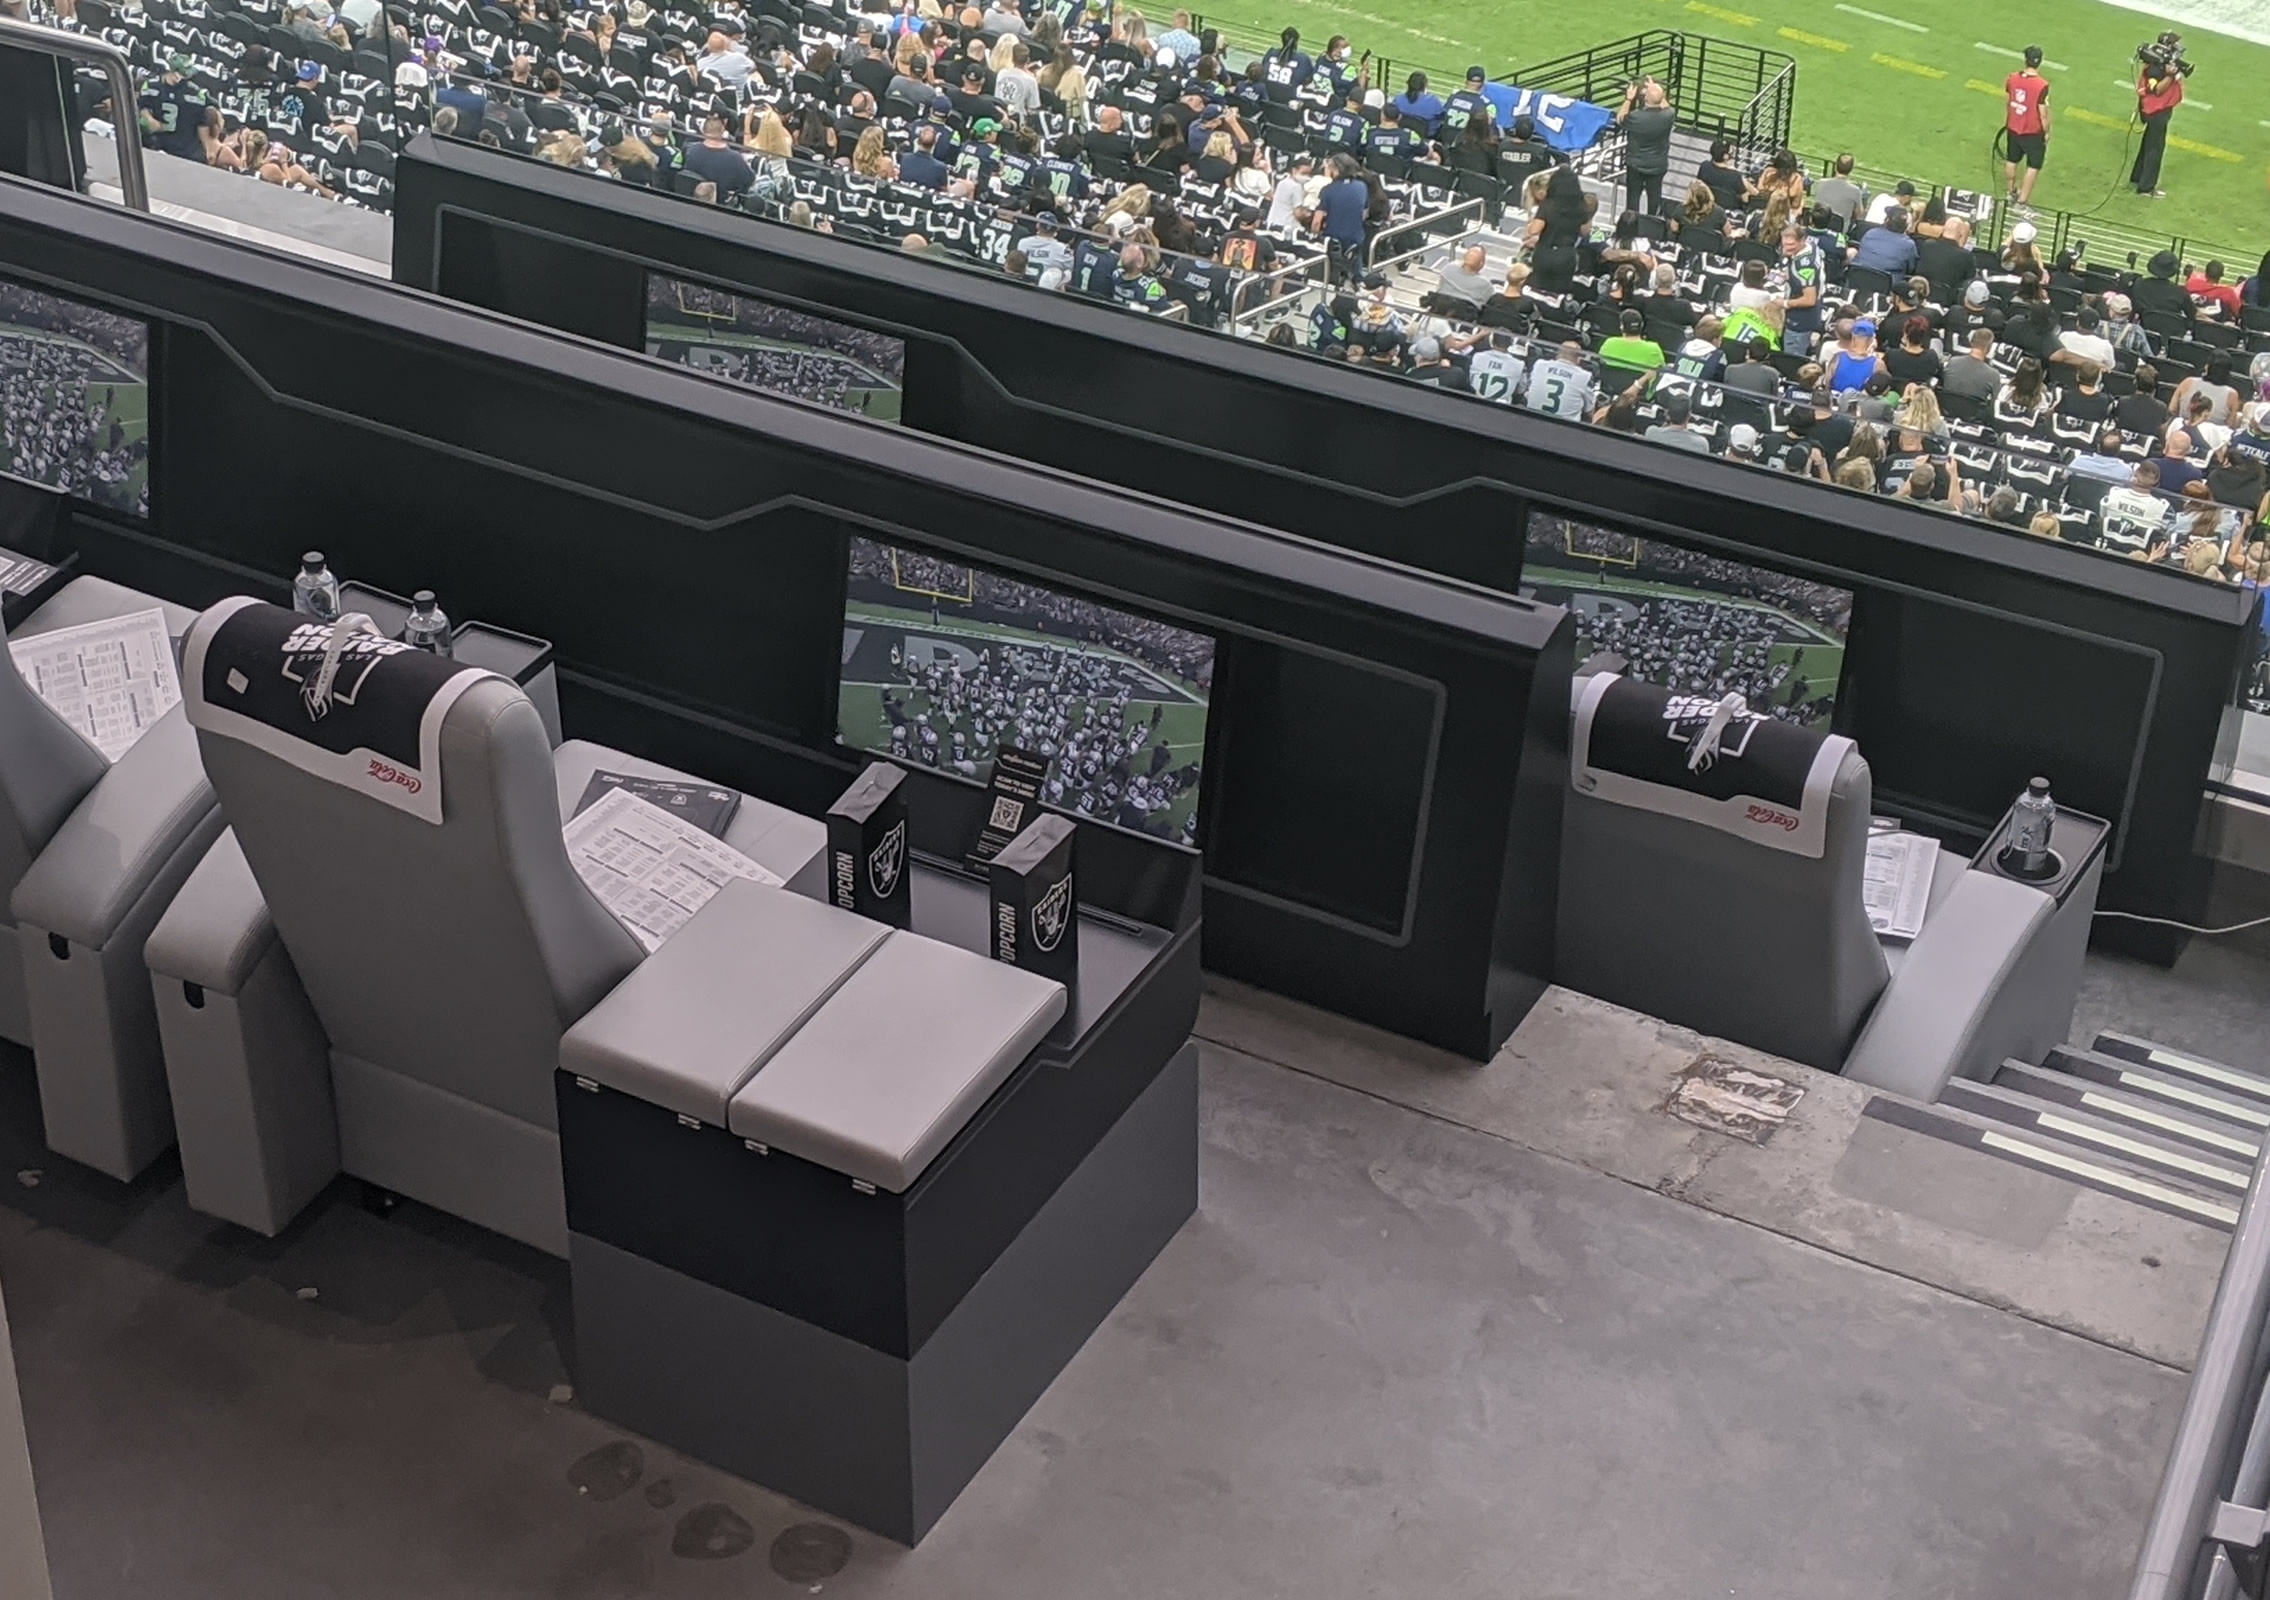 Learn about 120+ imagen allegiant stadium seat numbers In